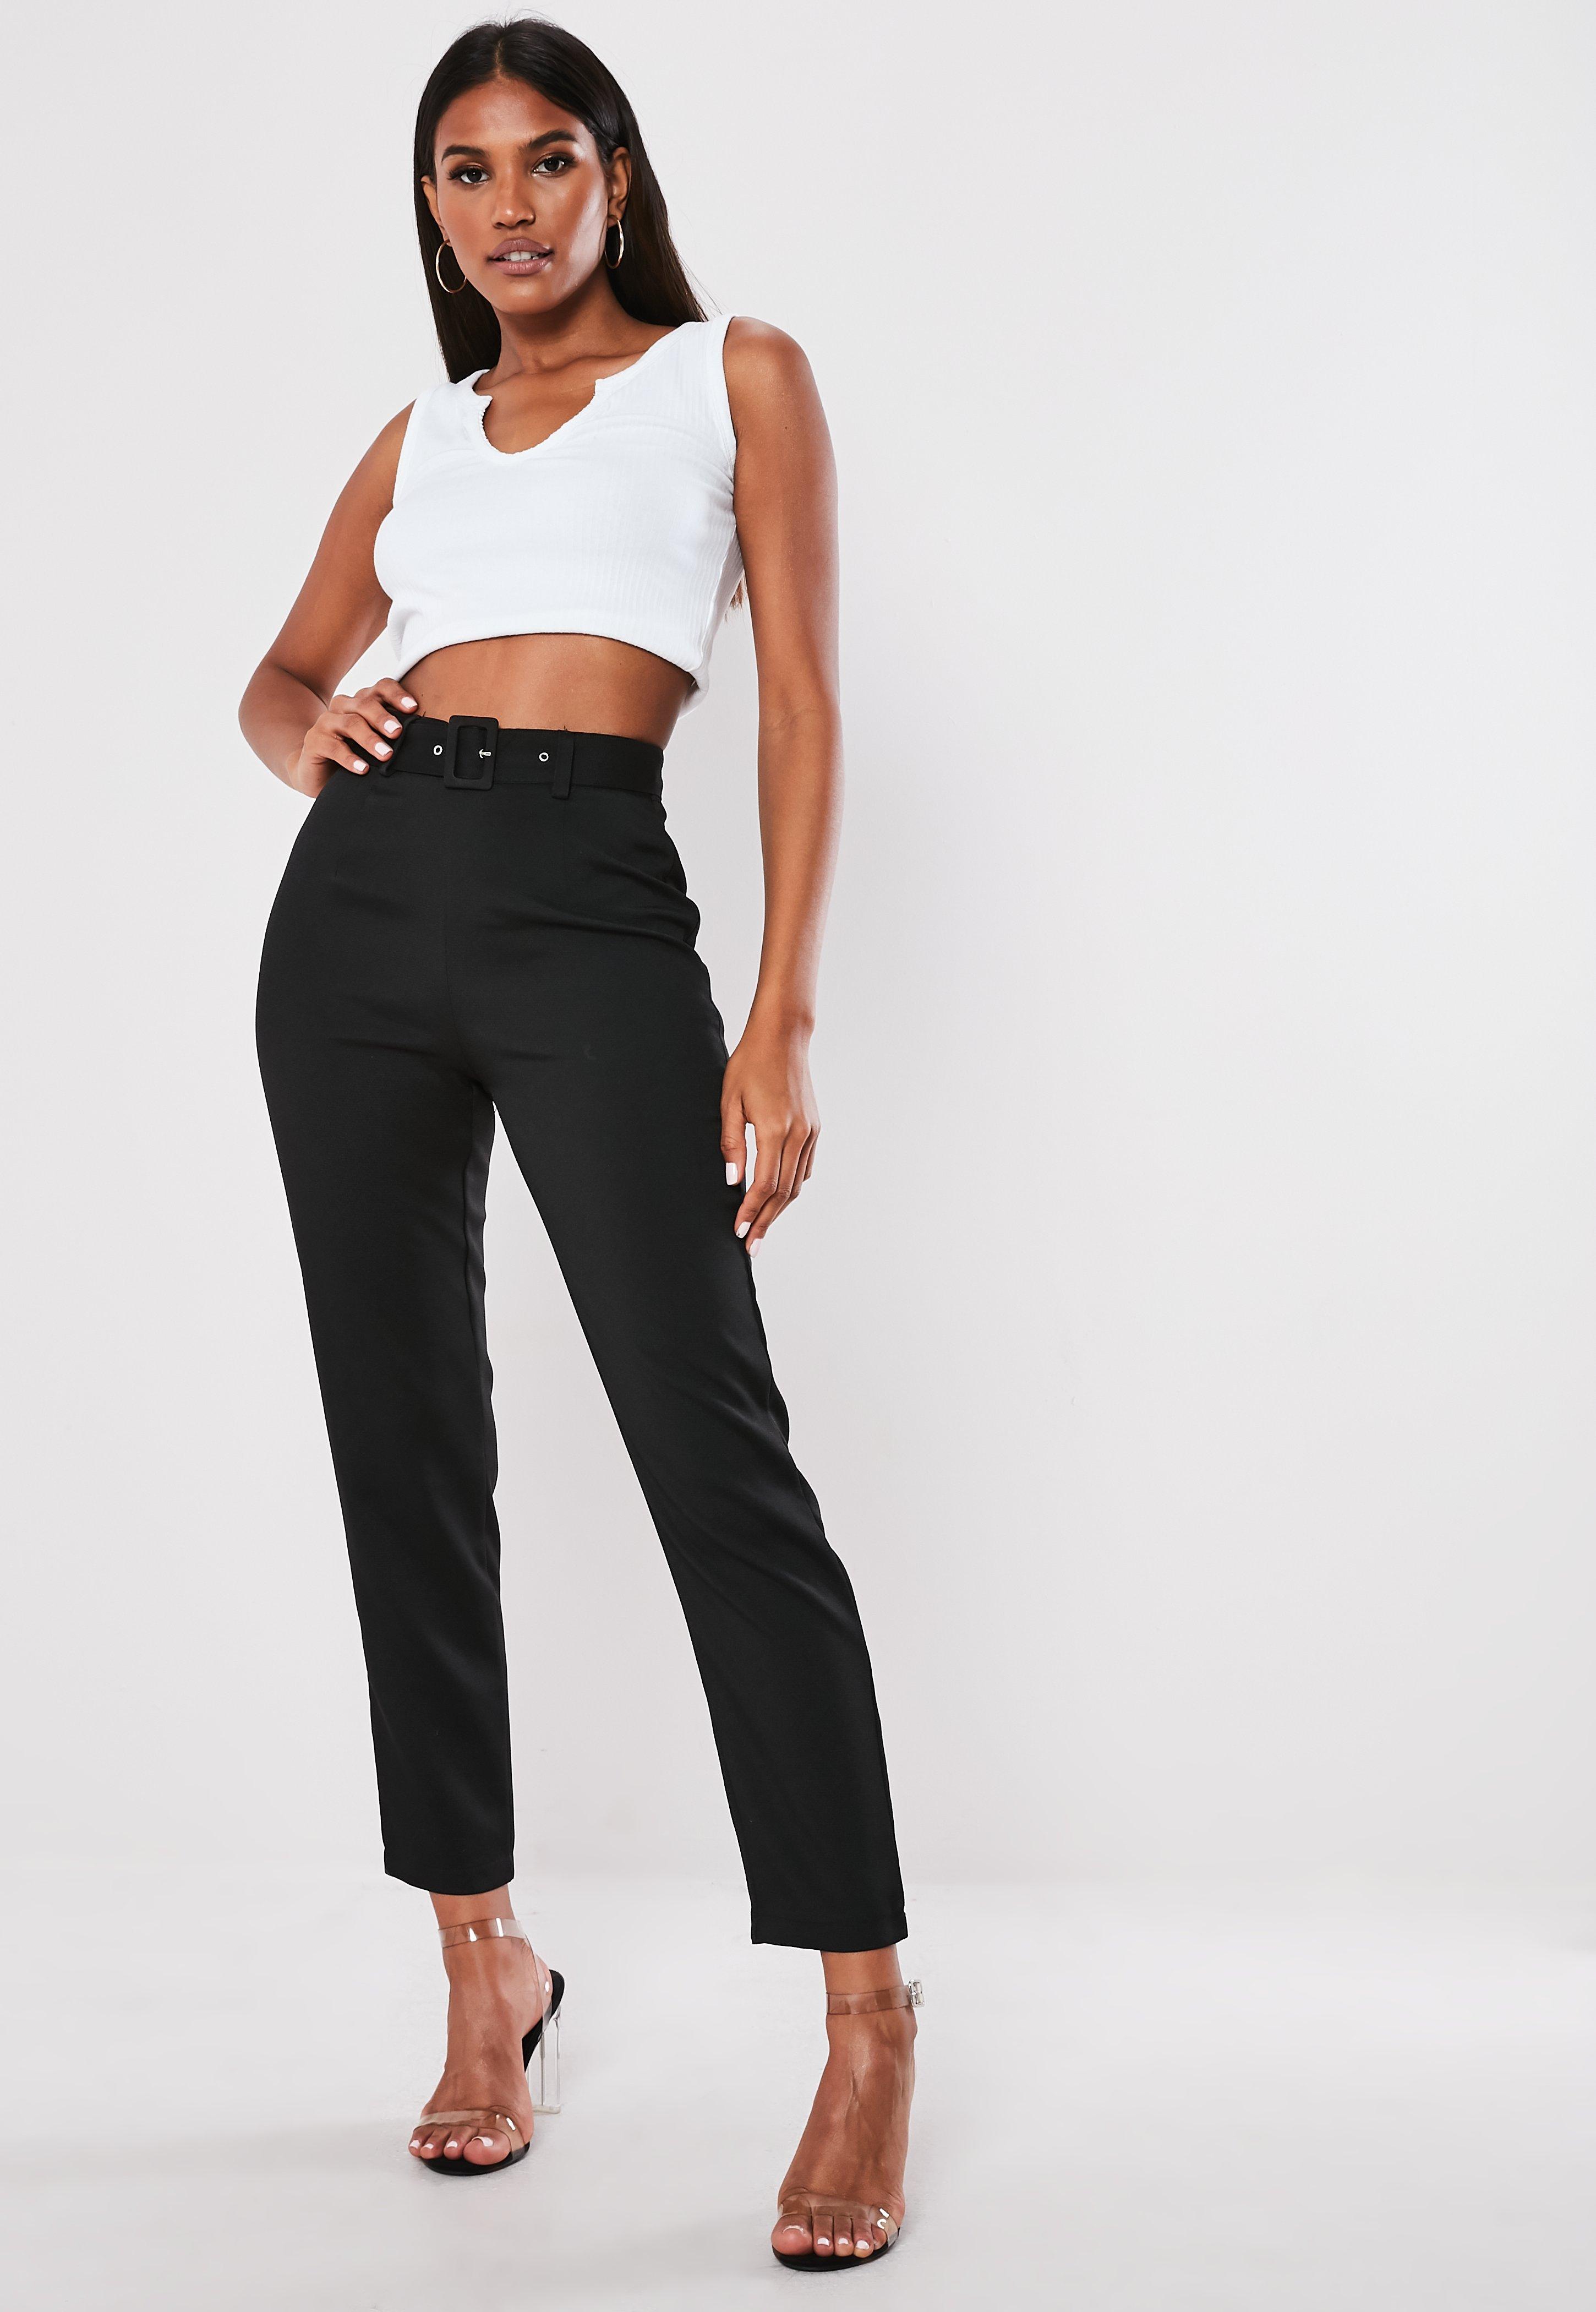 Missguided Synthetic Petite Black Belted Cigarette Pants - Lyst